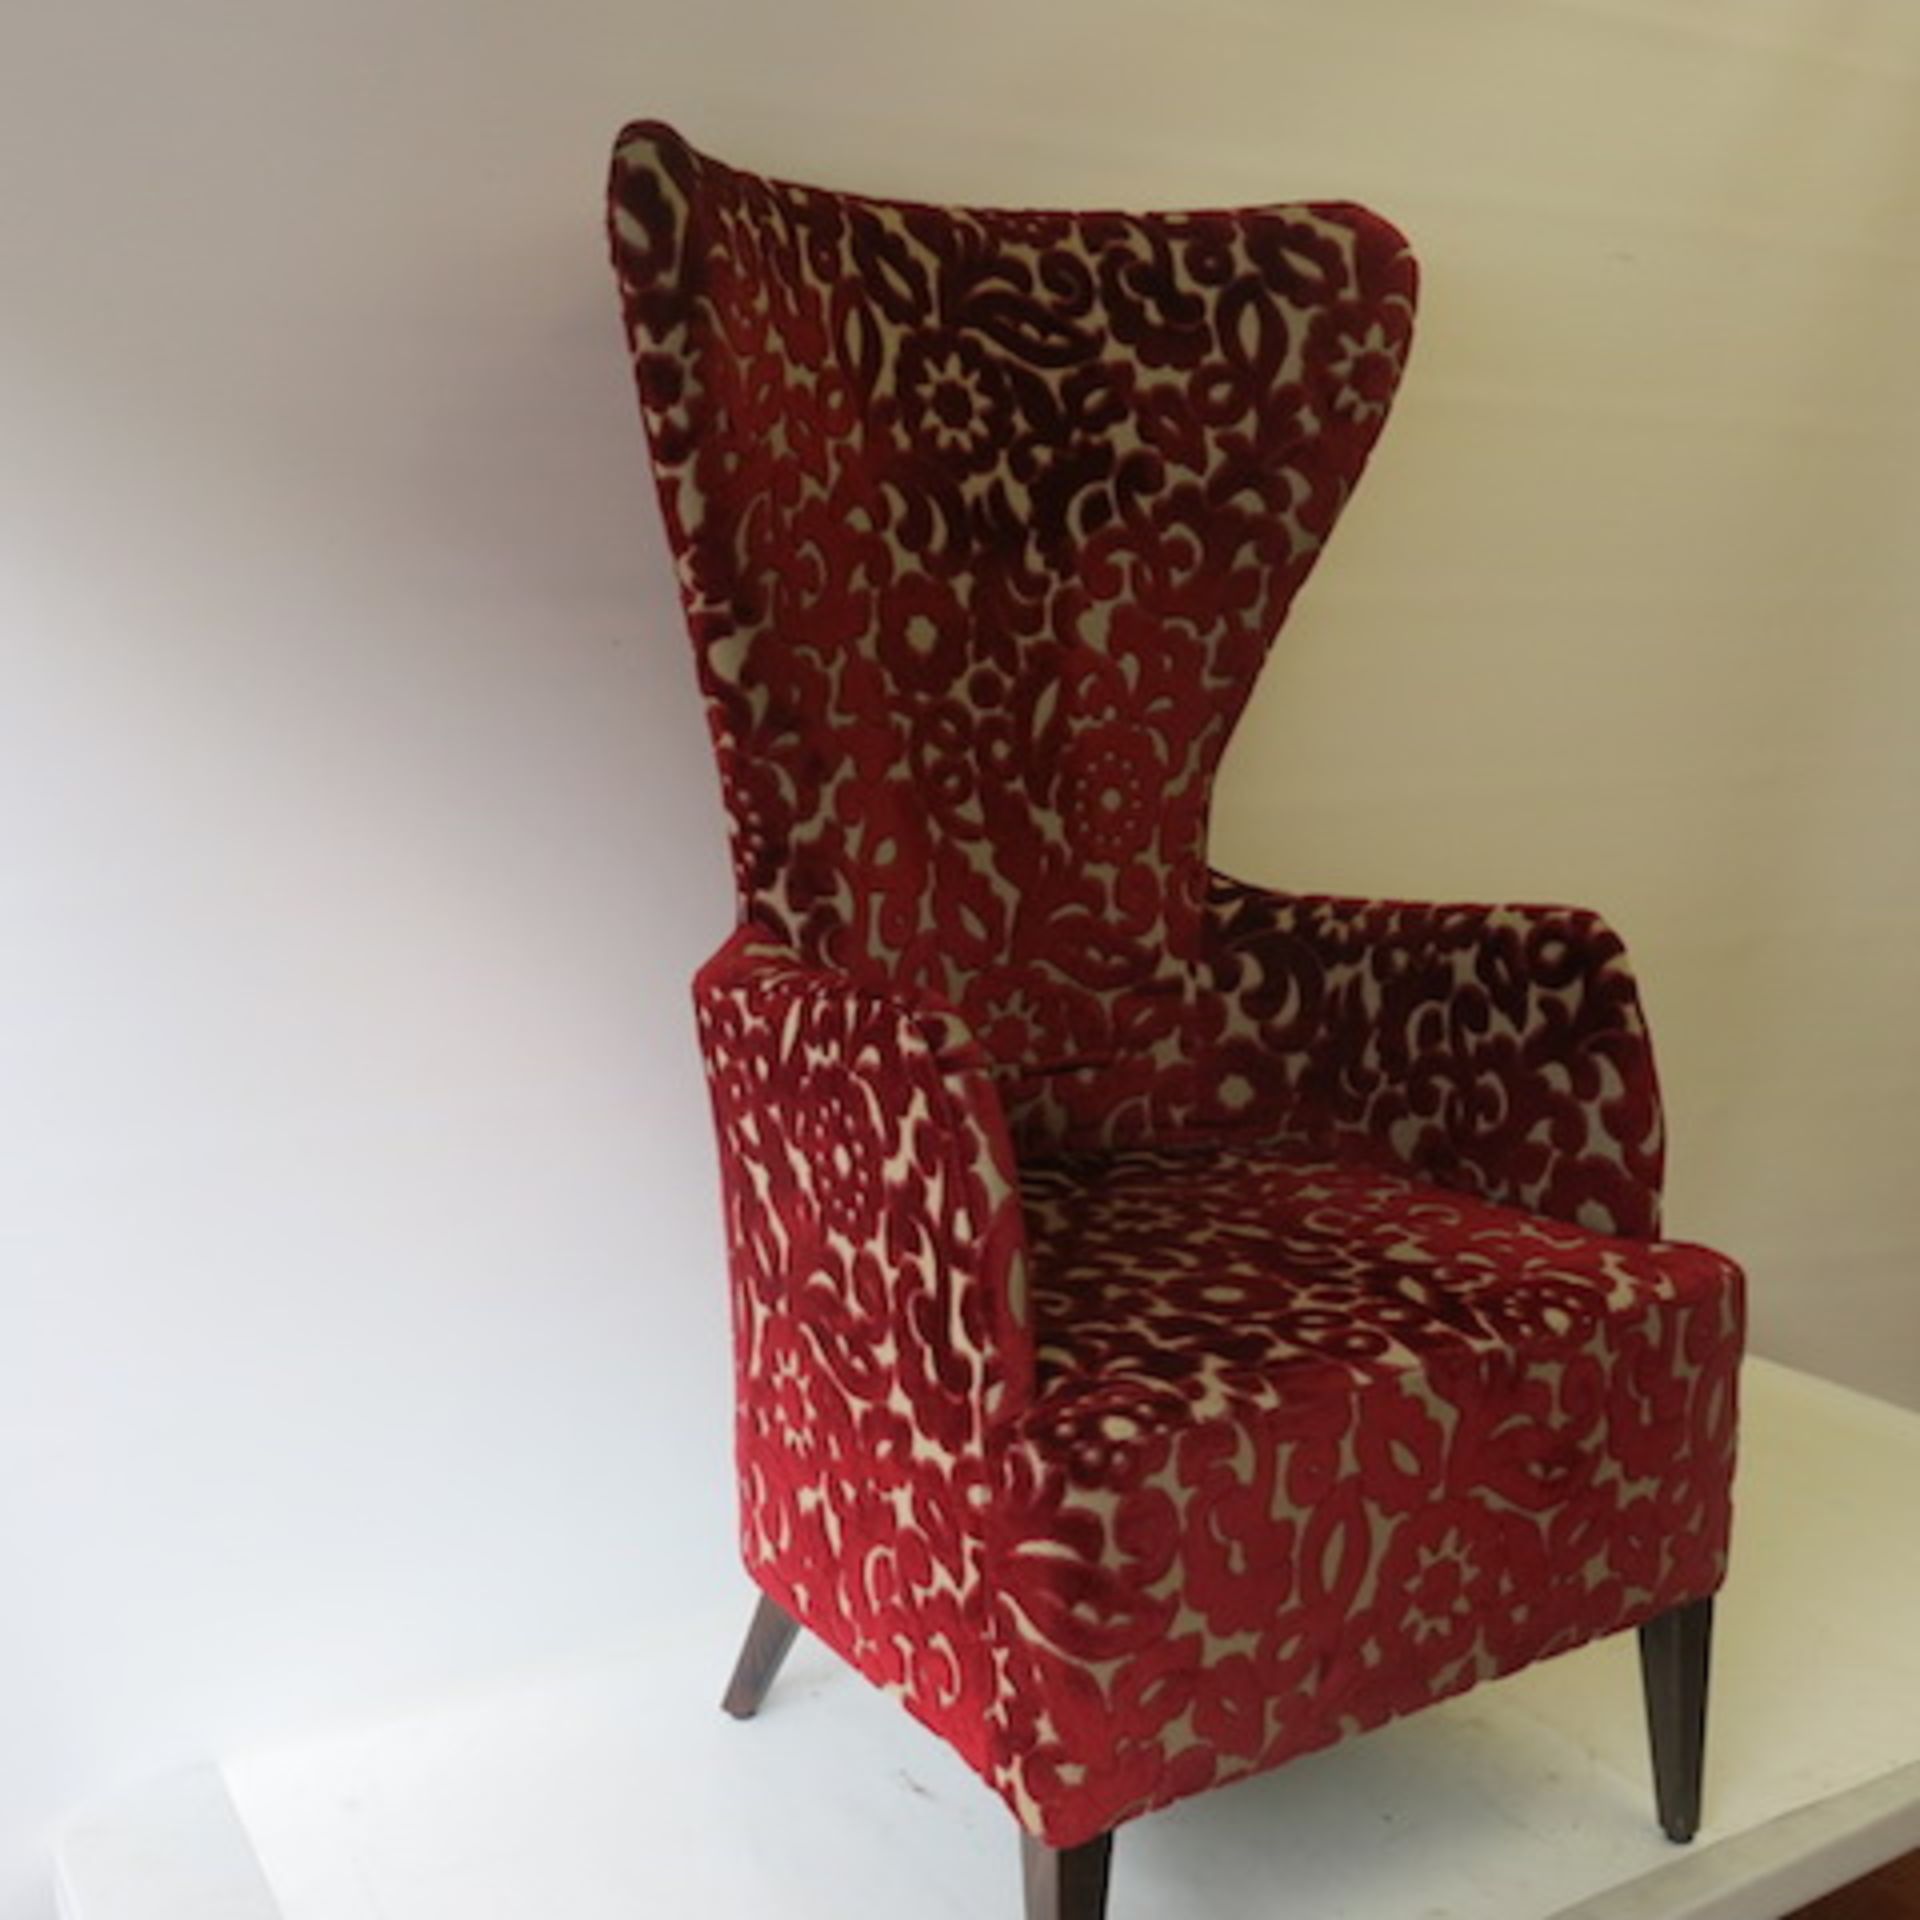 A High Back Wing Armchair with Crushed Velour Pattern in Deep Red & Cream, appears in good condition - Image 3 of 6